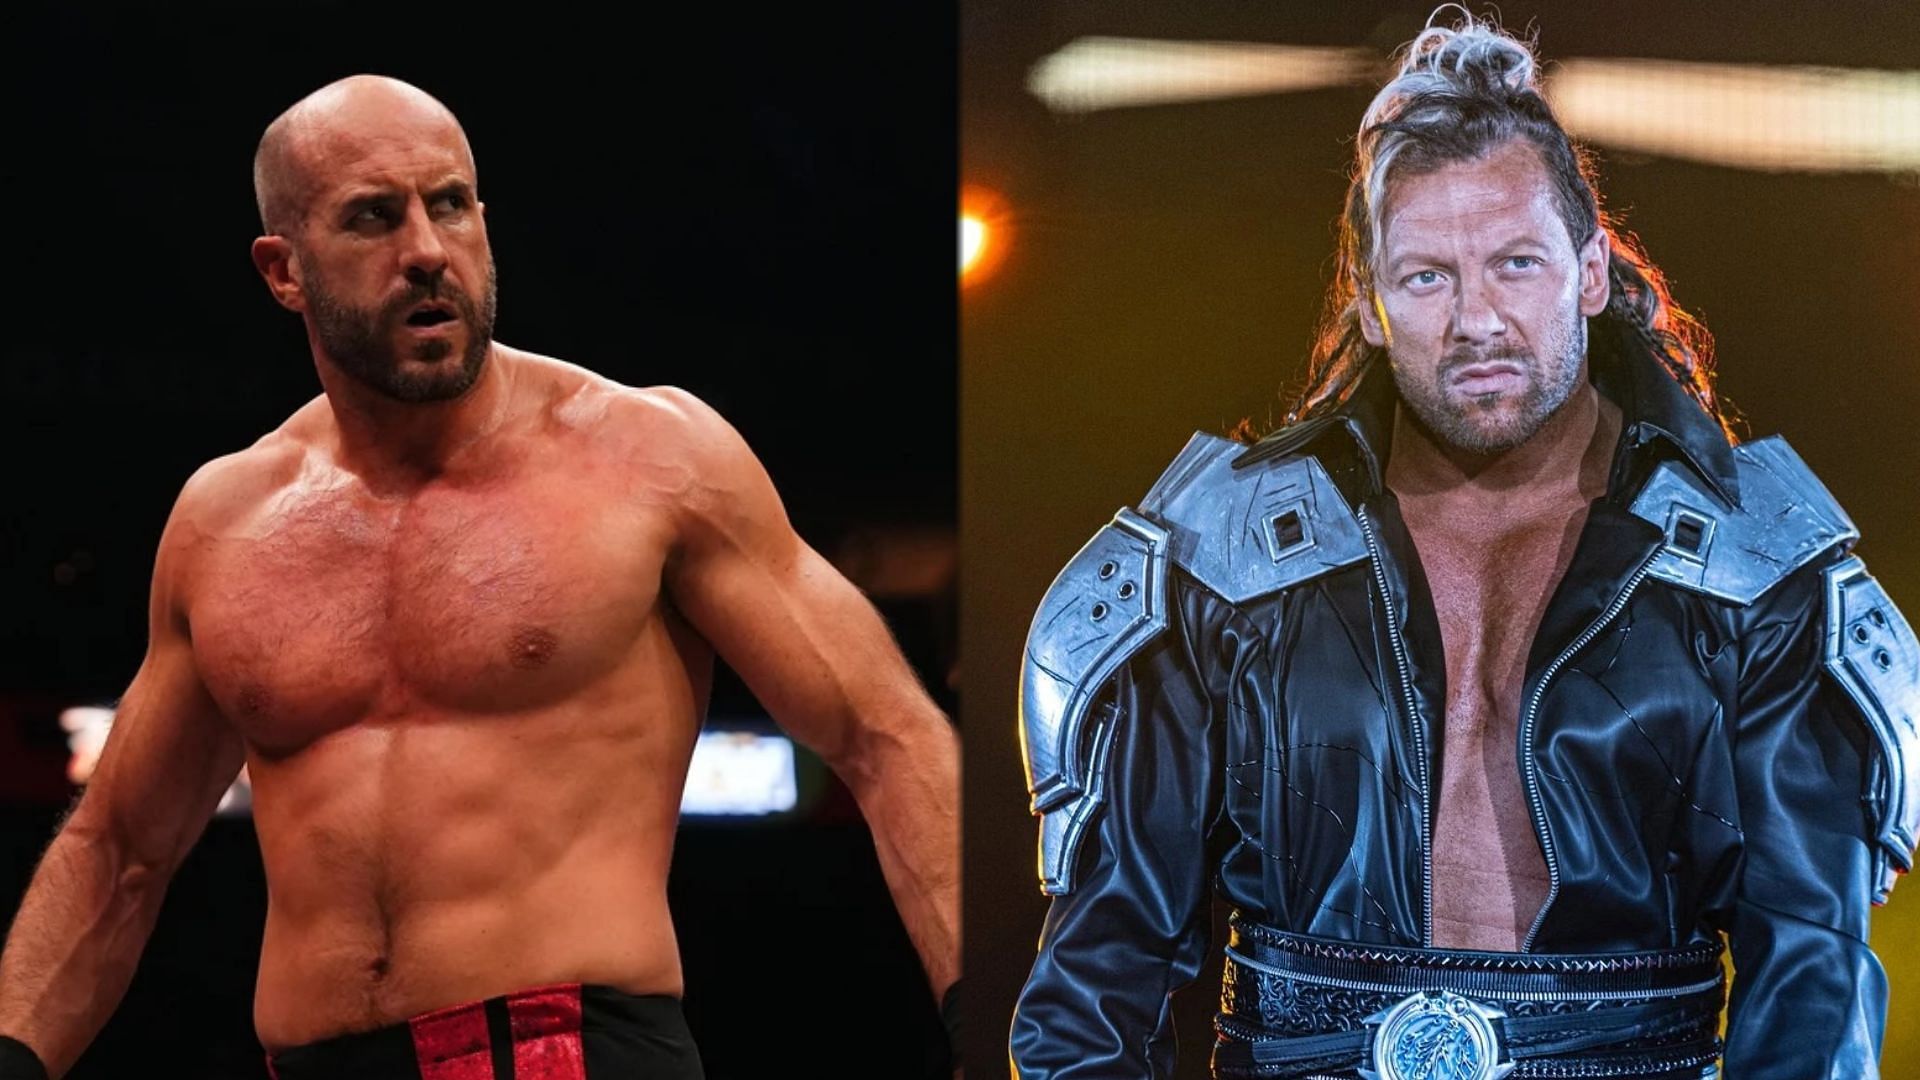 Will The Swiss Superman and The Cleaner go to war in AEW?